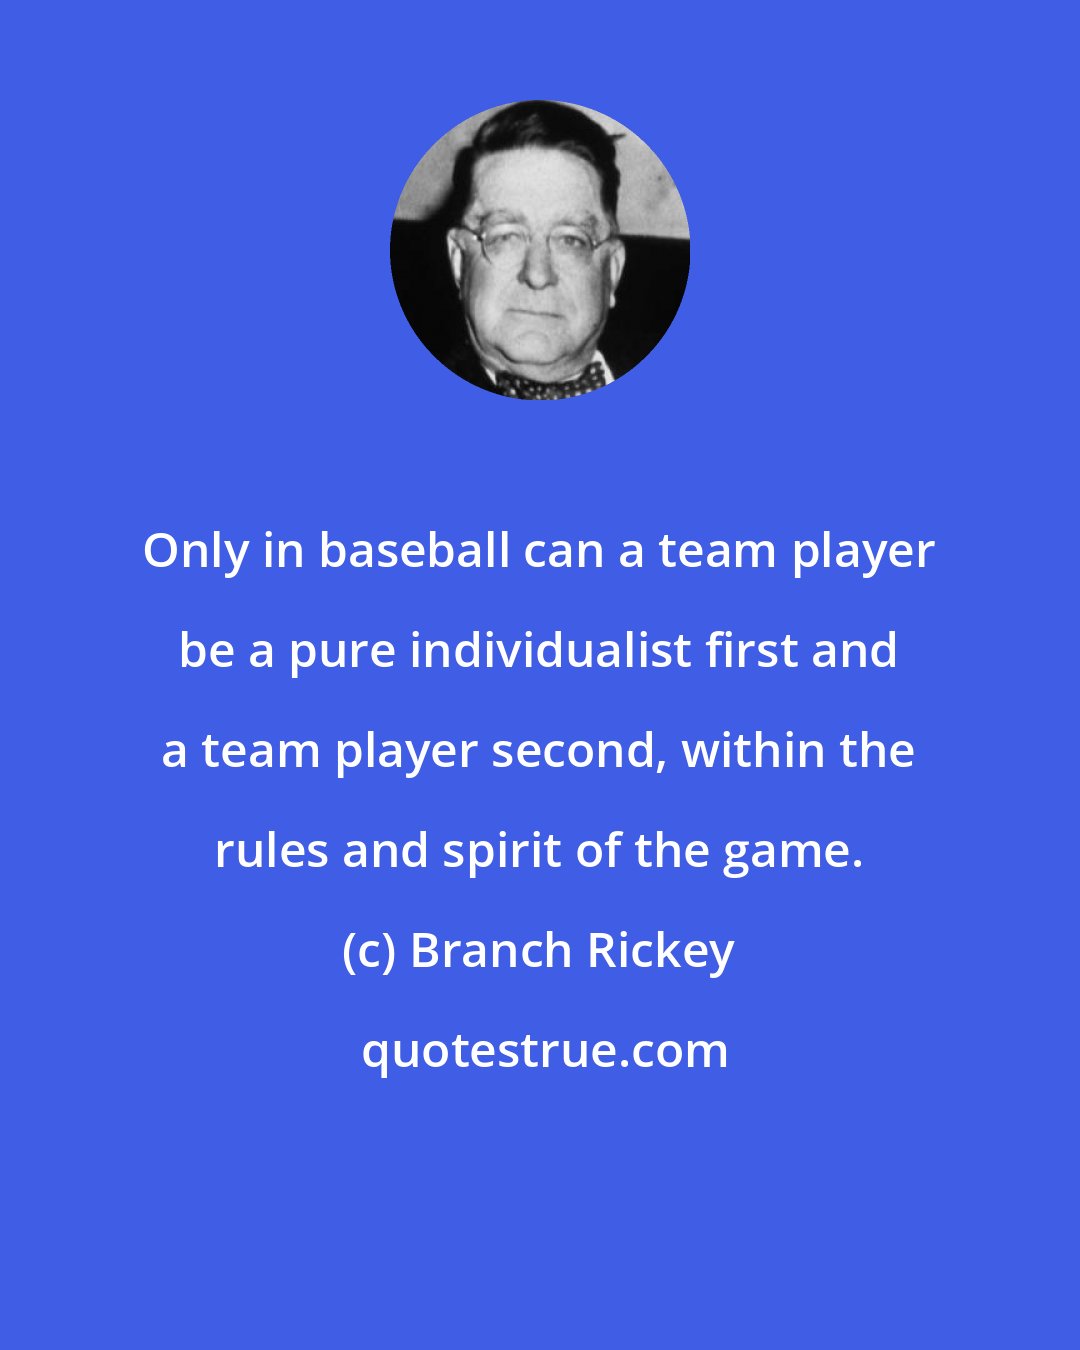 Branch Rickey: Only in baseball can a team player be a pure individualist first and a team player second, within the rules and spirit of the game.